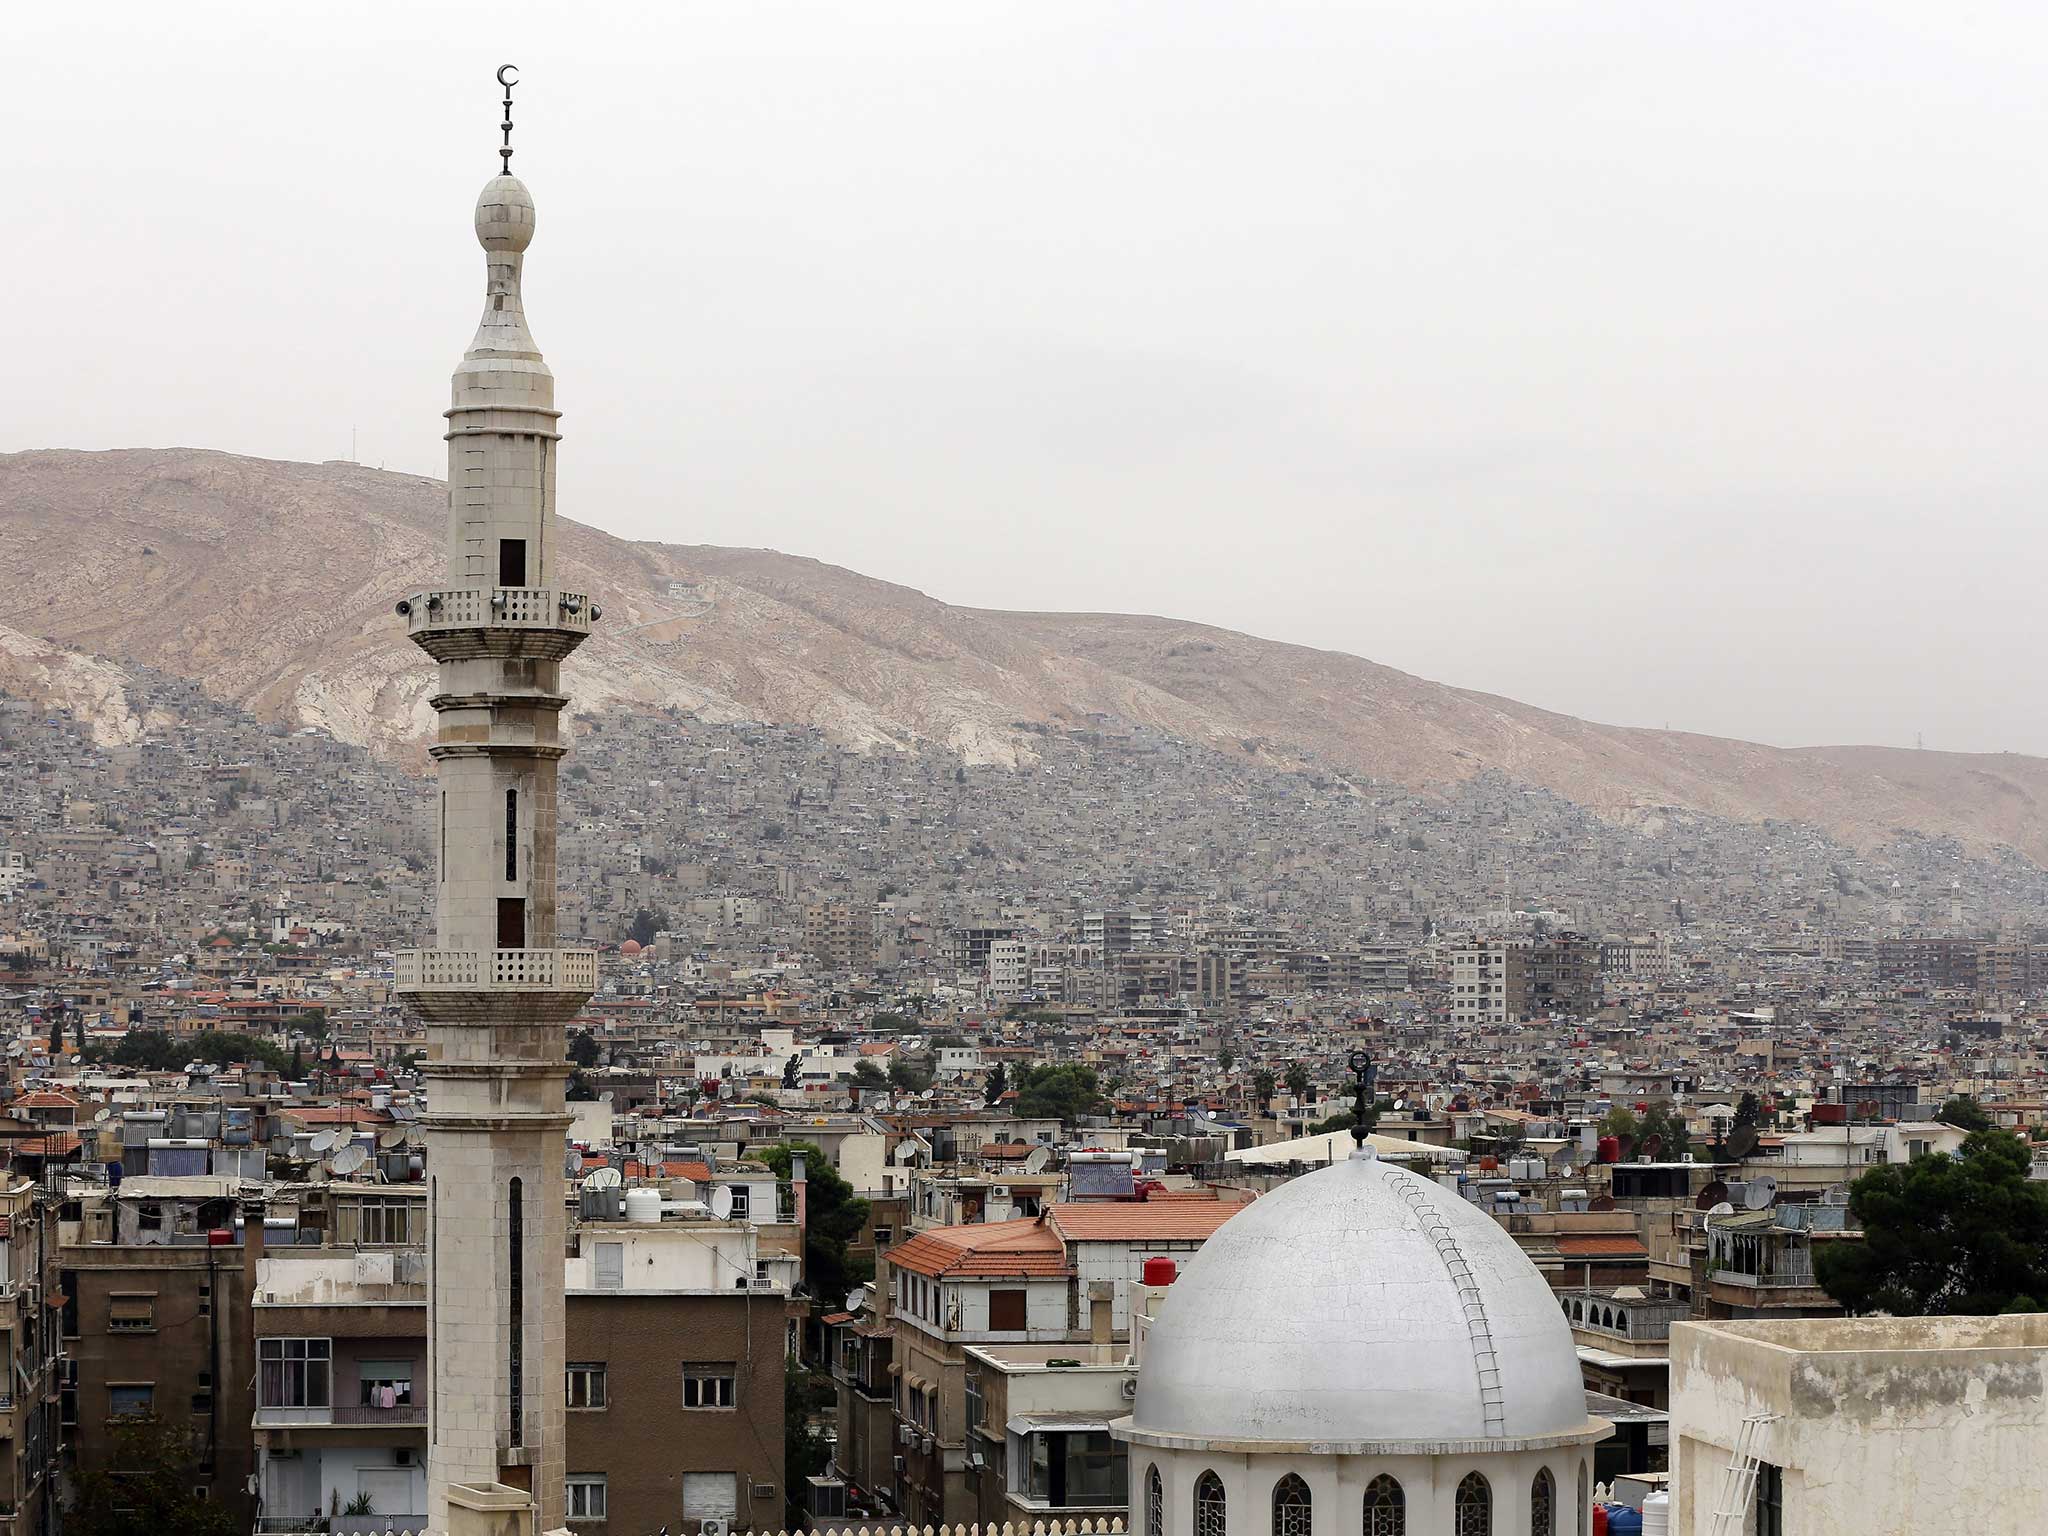 Mount Qasioun, said to be where Cain killed Abel, rises above the Syrian capital Damascus. Centuries on, the violence continues